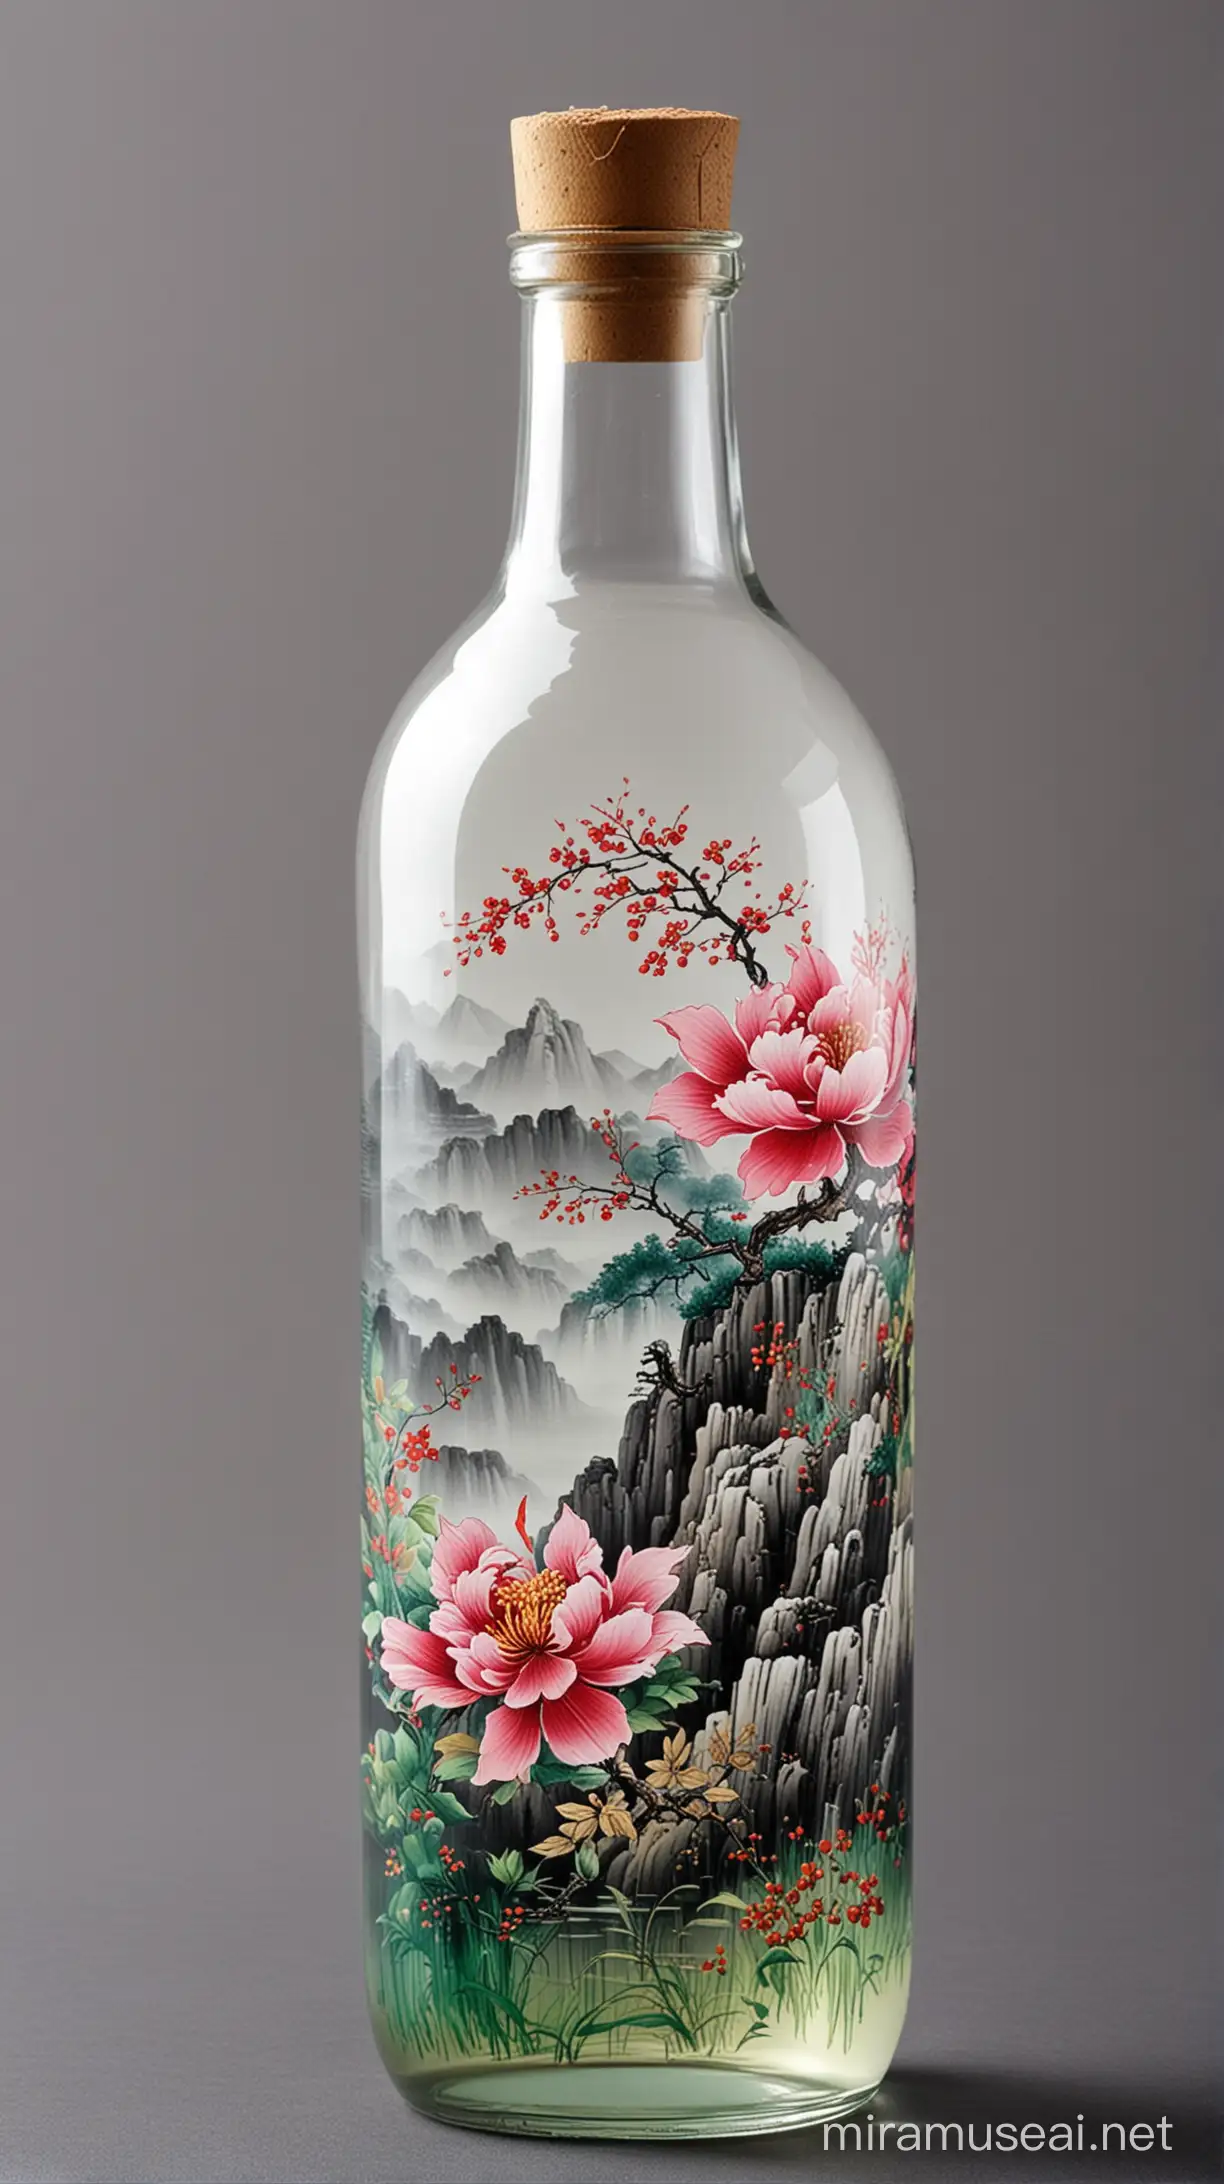 Chinese Art Painted on Glass Bottle Traditional HandPainted Elegance